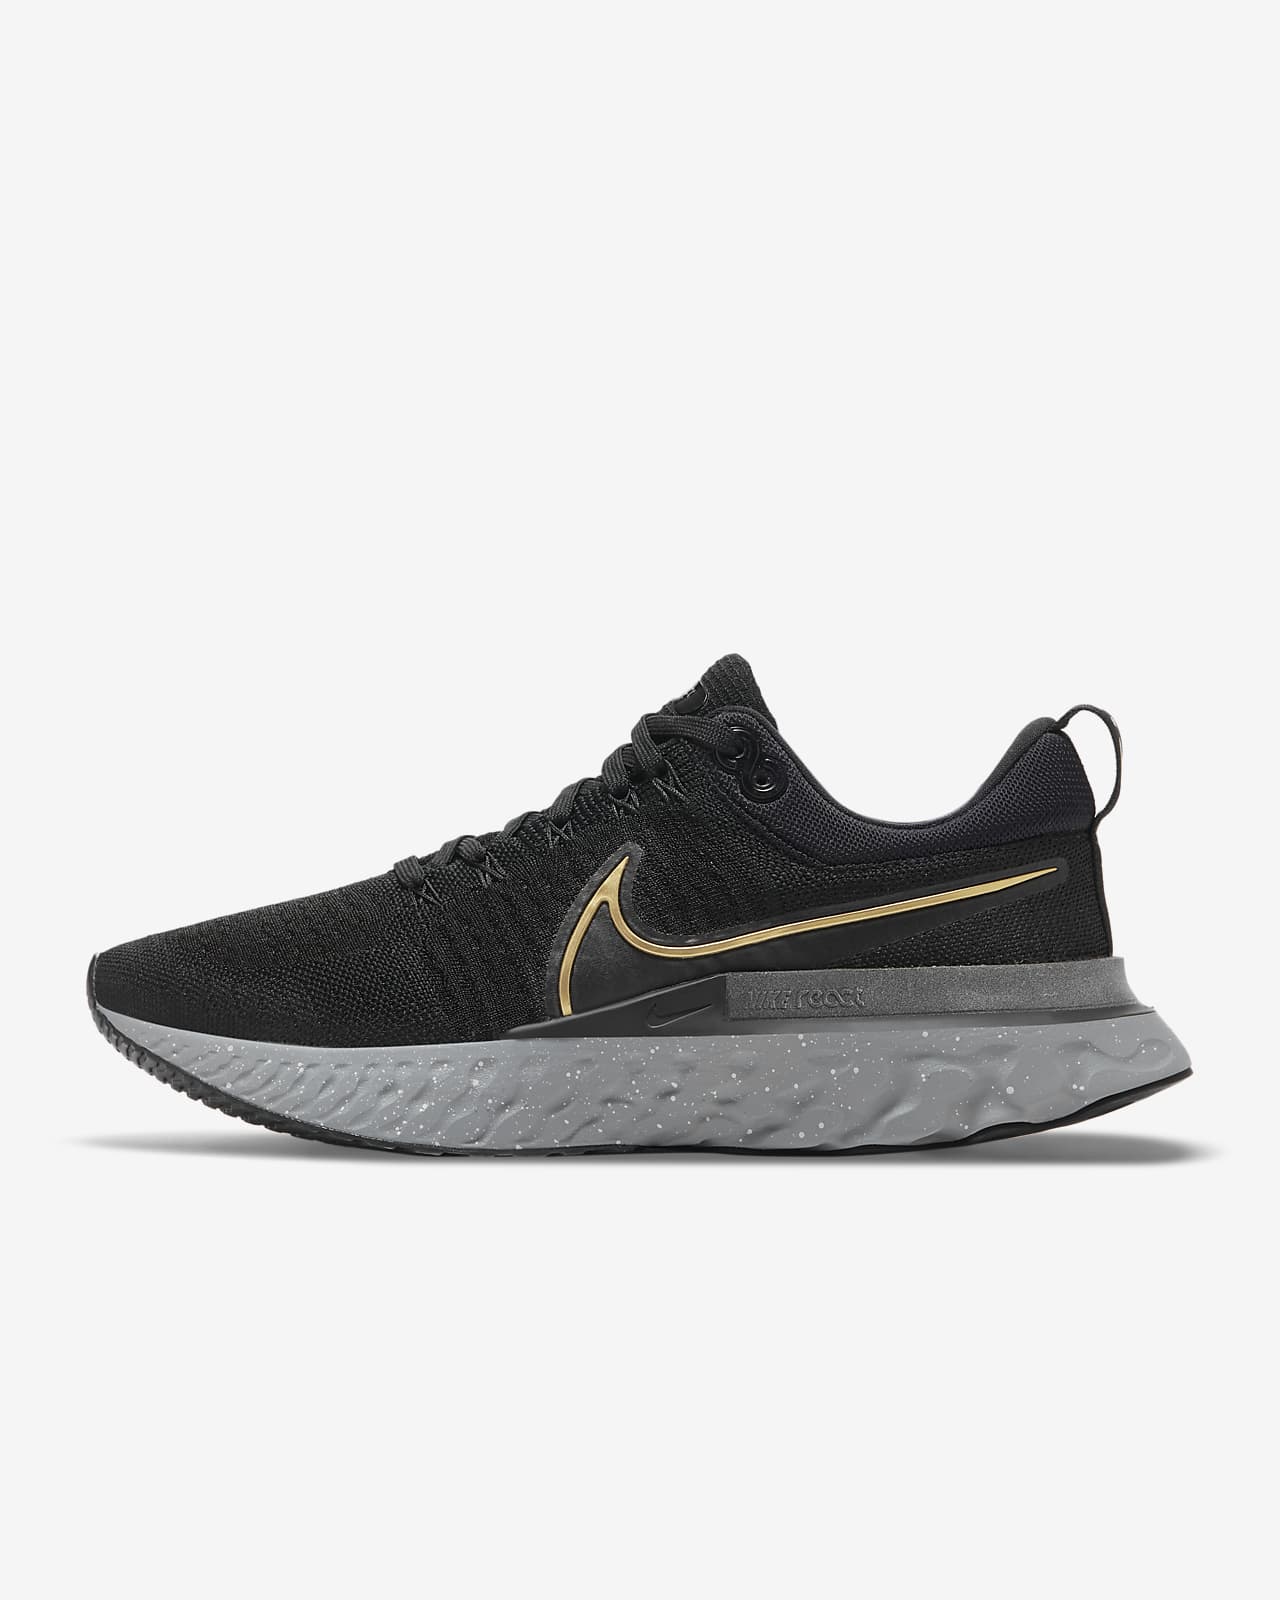 Chaussure de running sur route Nike React Infinity 2 pour homme